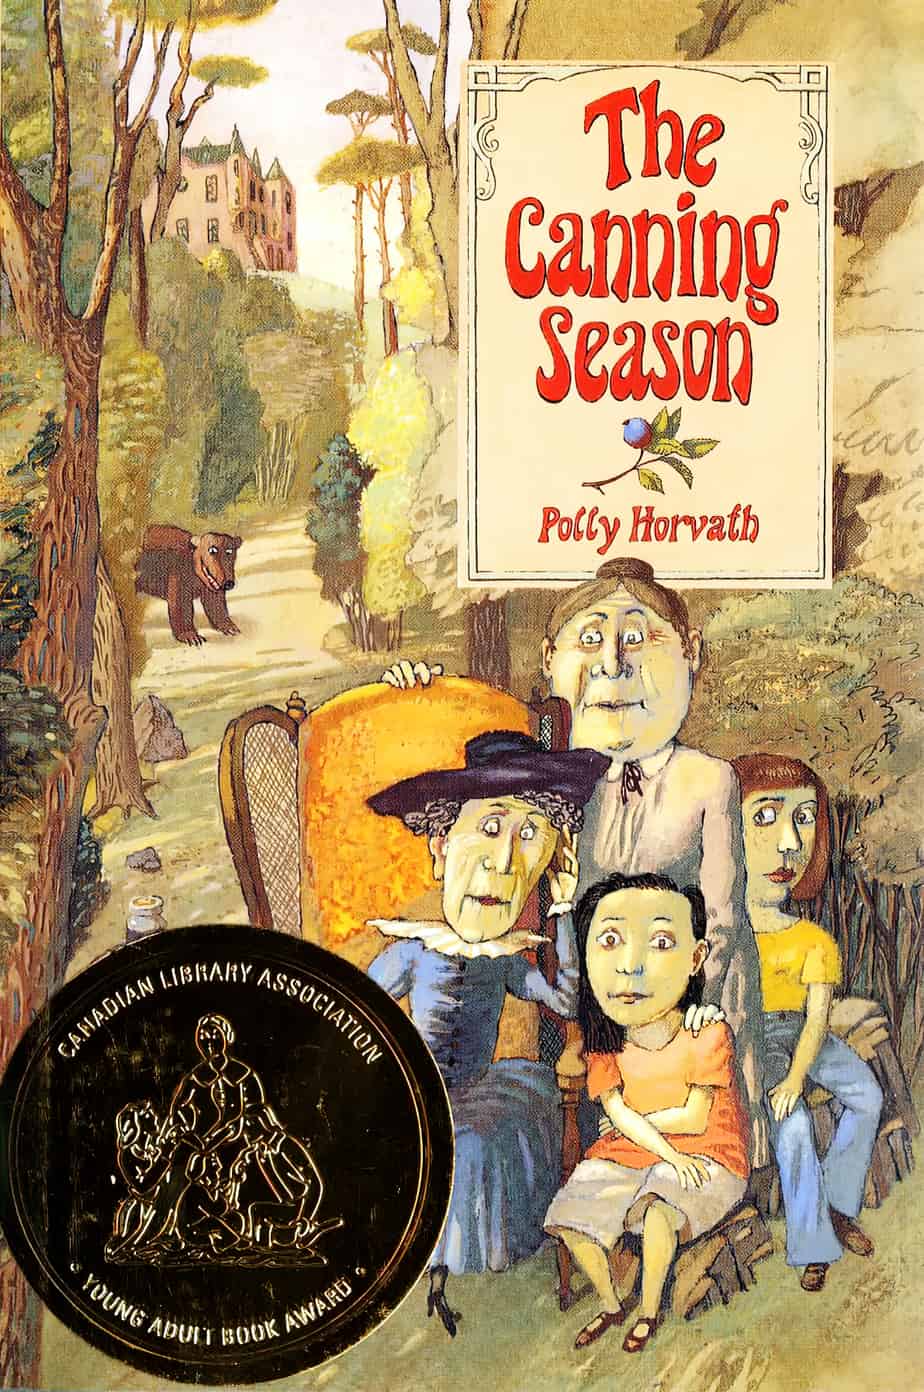 The Canning Season by Polly Horvarth